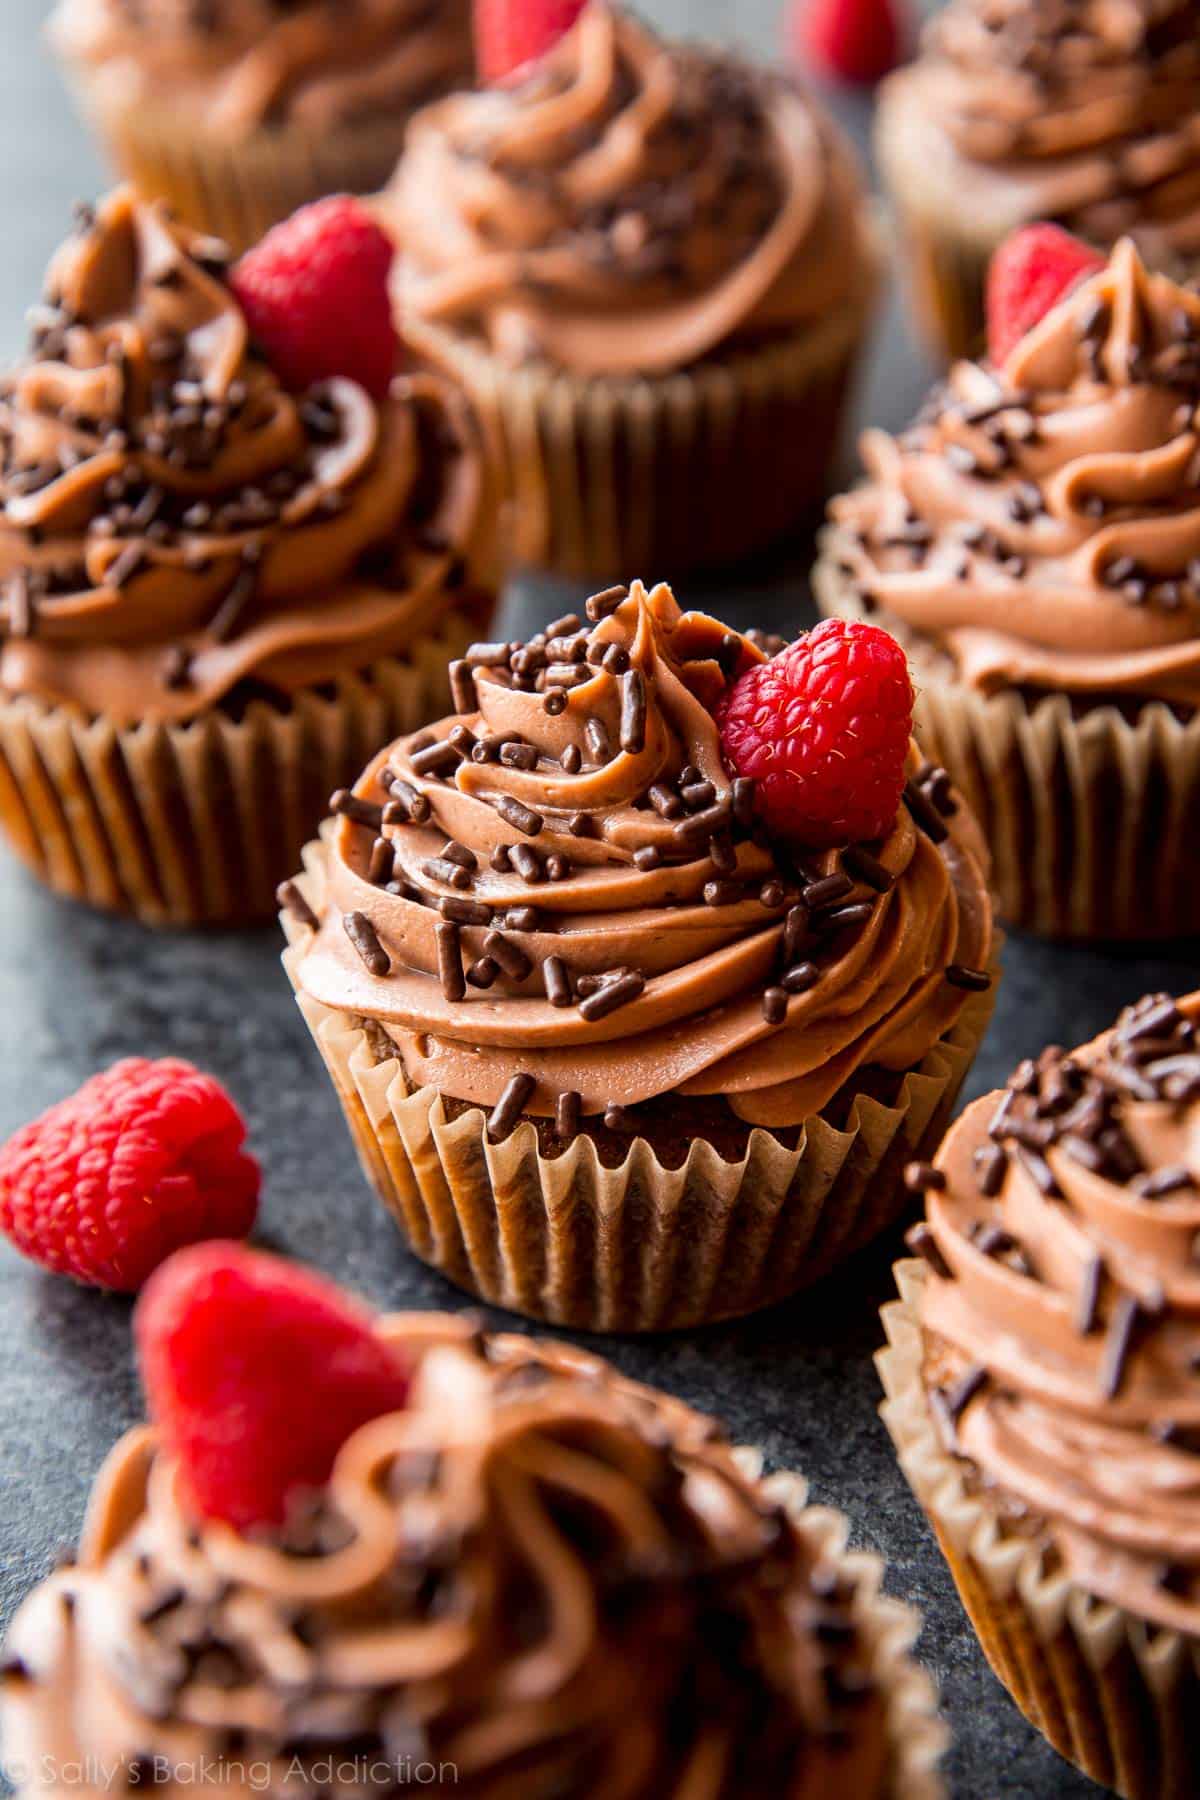 Mocha cupcakes with Nutella frosting